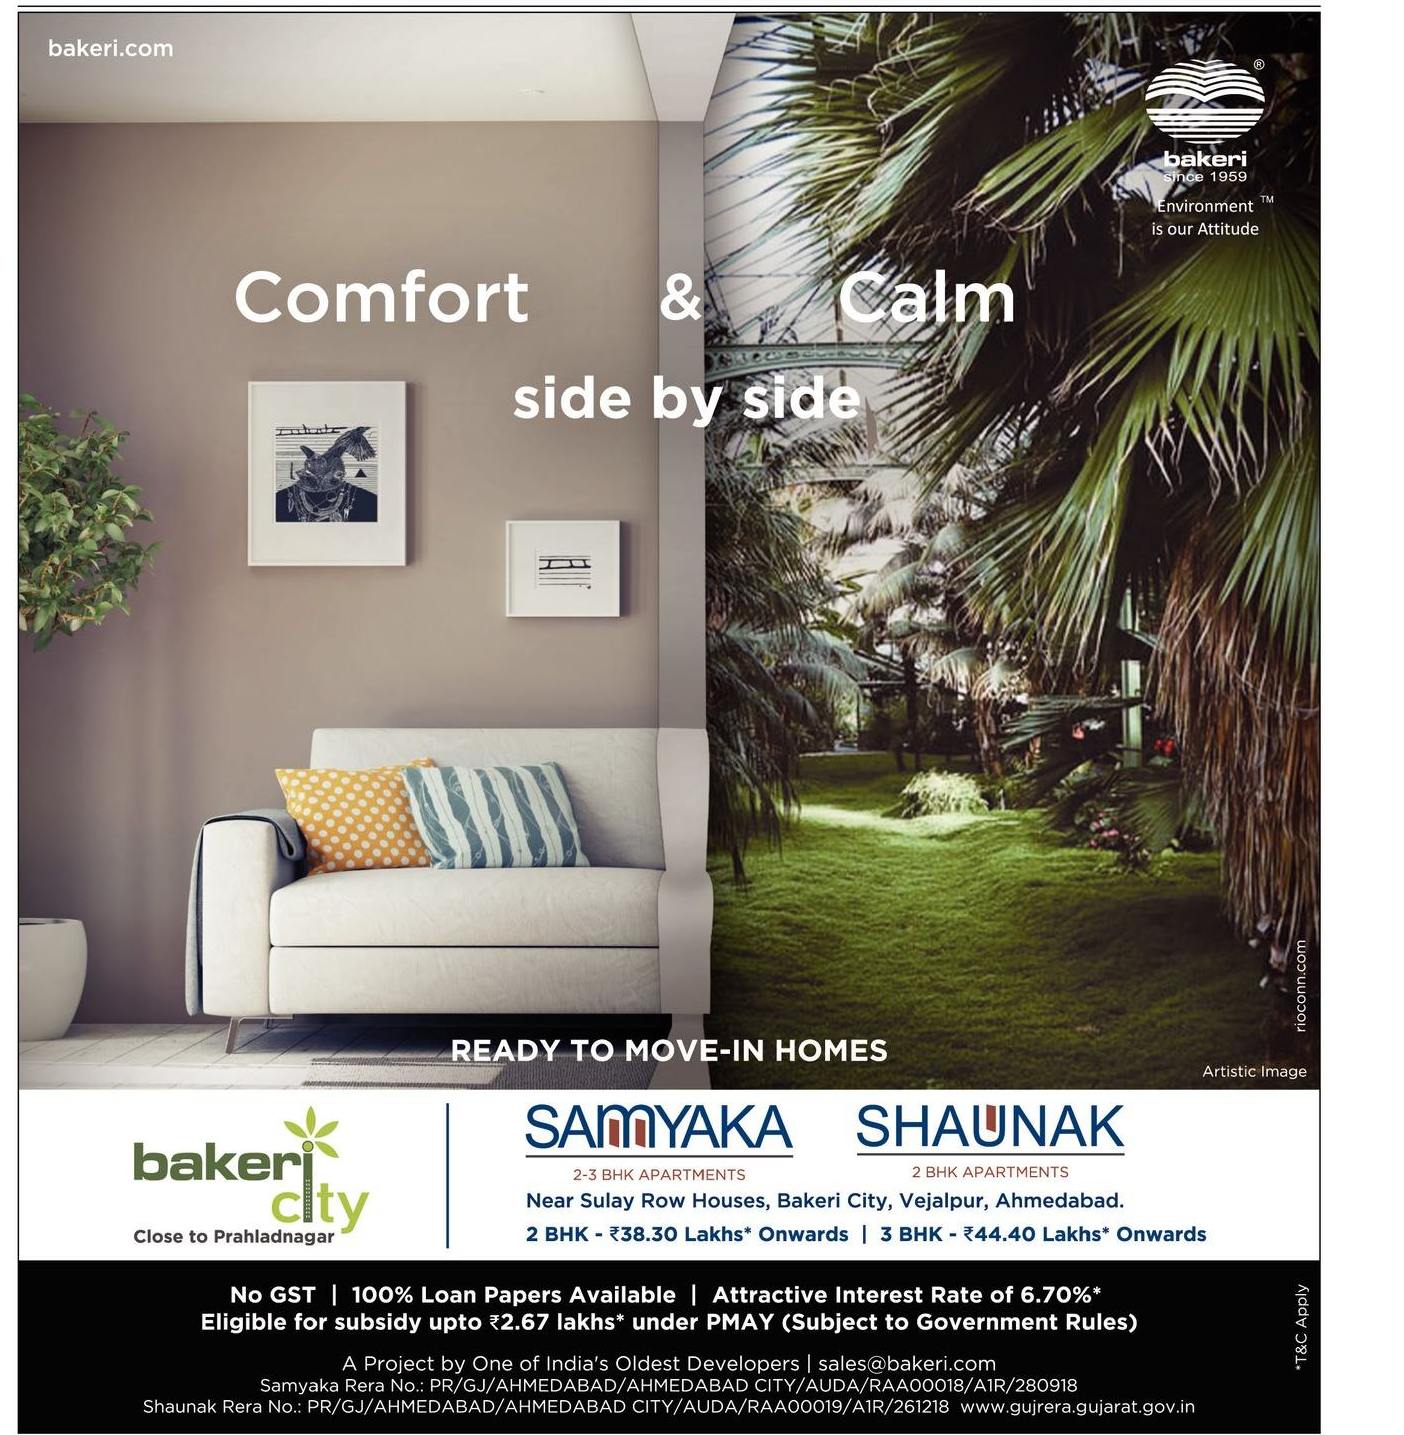 bakeri-city-ready-to-move-in-homes-comfort-and-calm-side-by-side-ad-gujarat-samachar-ahmedabad-27-06-2021